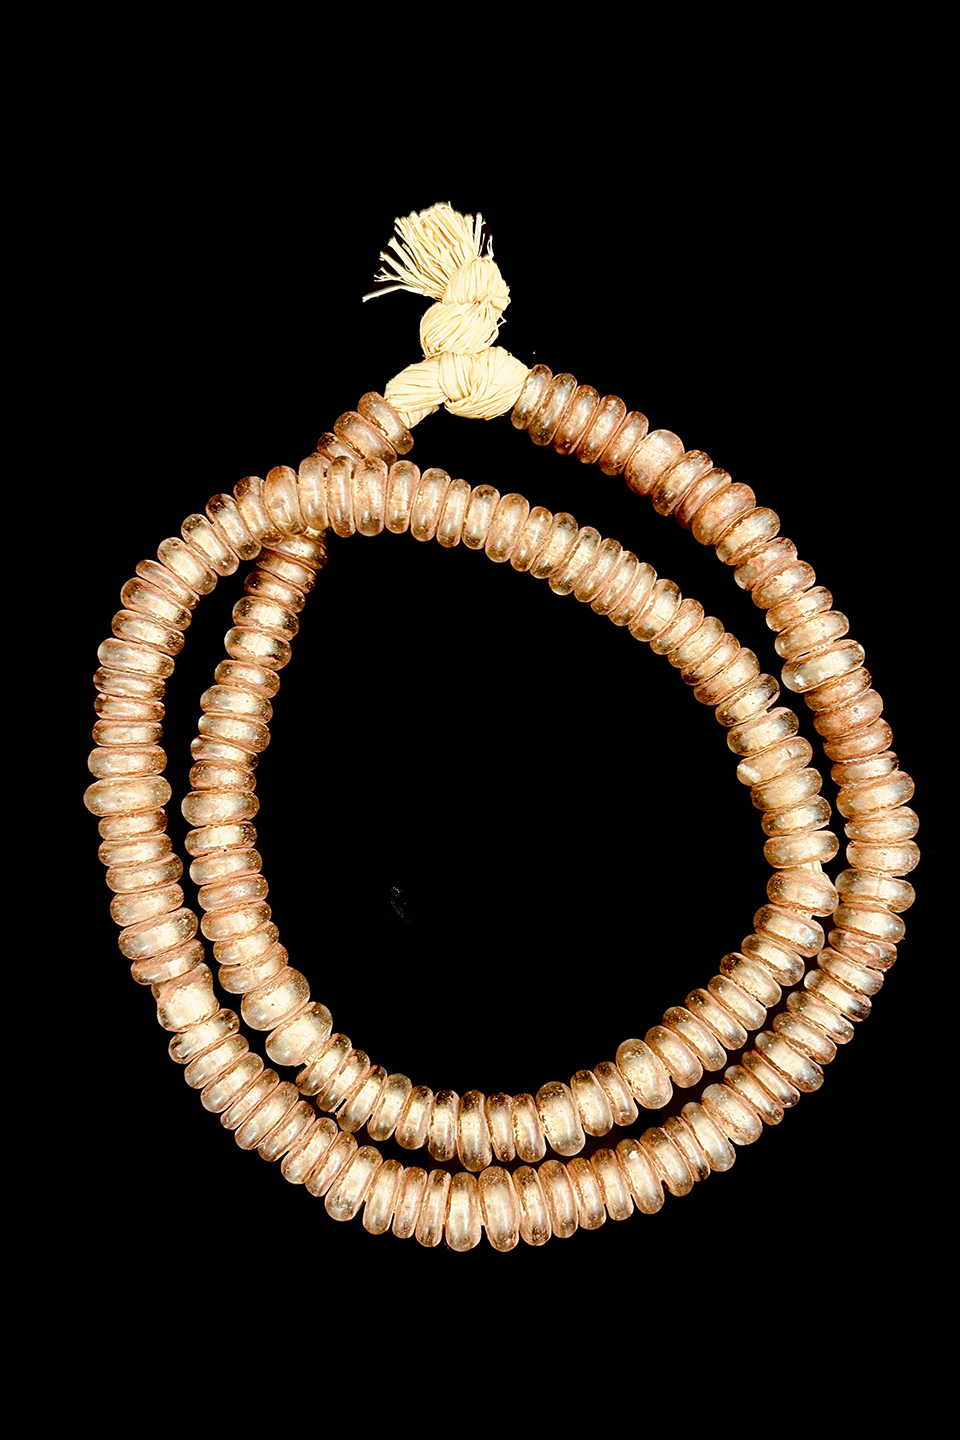 Copper Colored Glass Donut Beads - Dogon People, Mali (1)